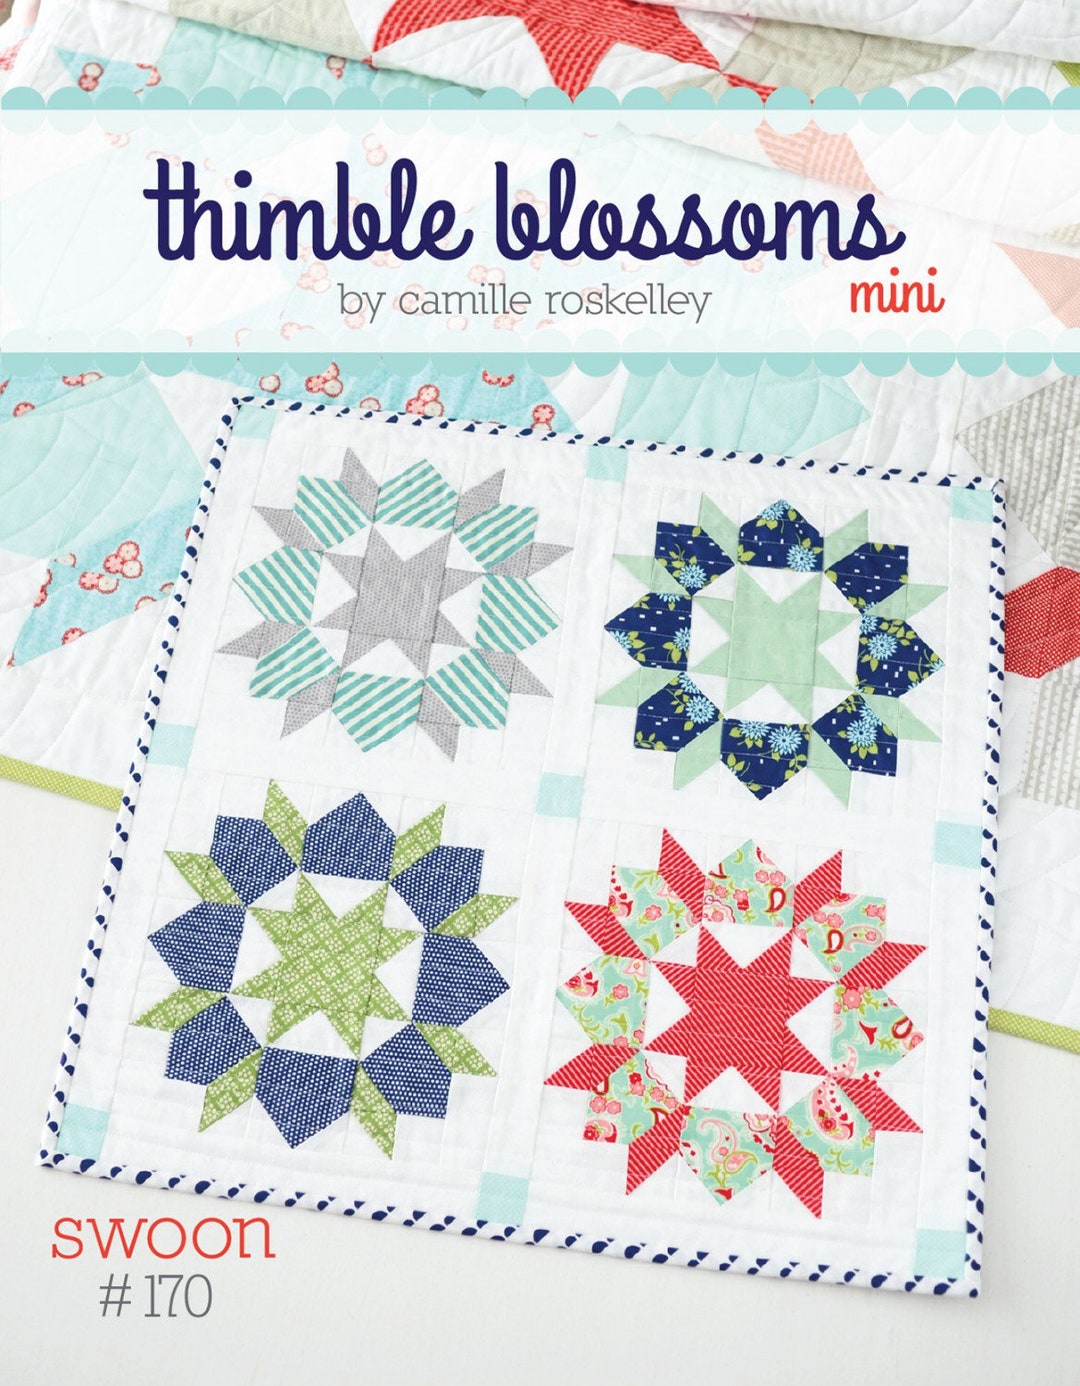 Swoon Mini Quilt Pattern Thimble Blossoms Camille - Etsy